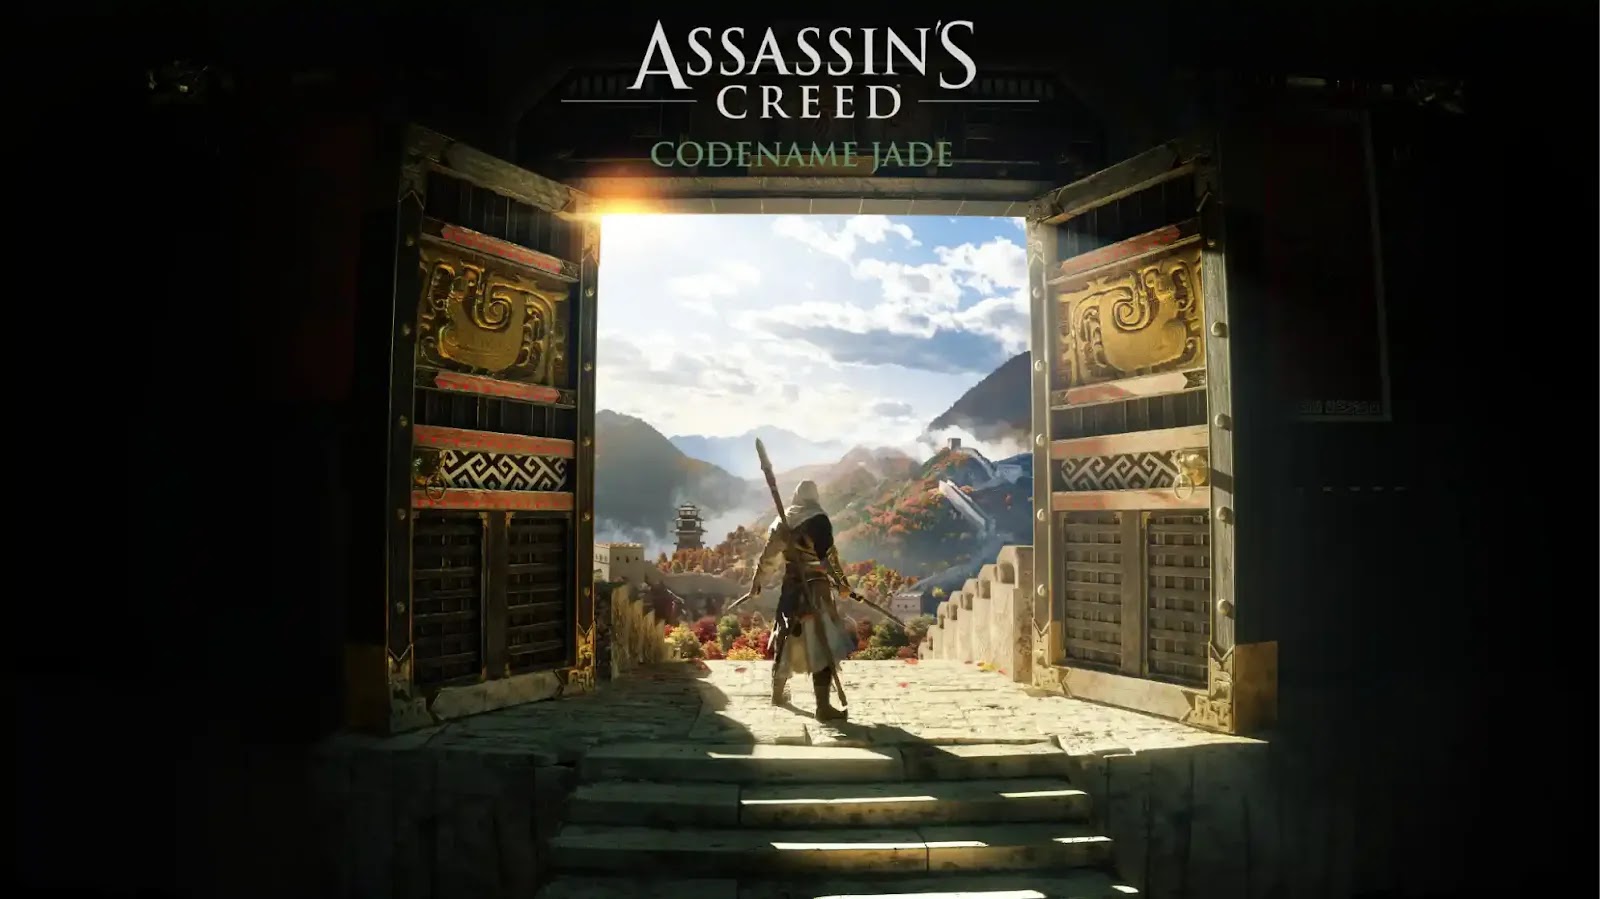 Assassin's Creed Codename Jade system requirement, size and release date